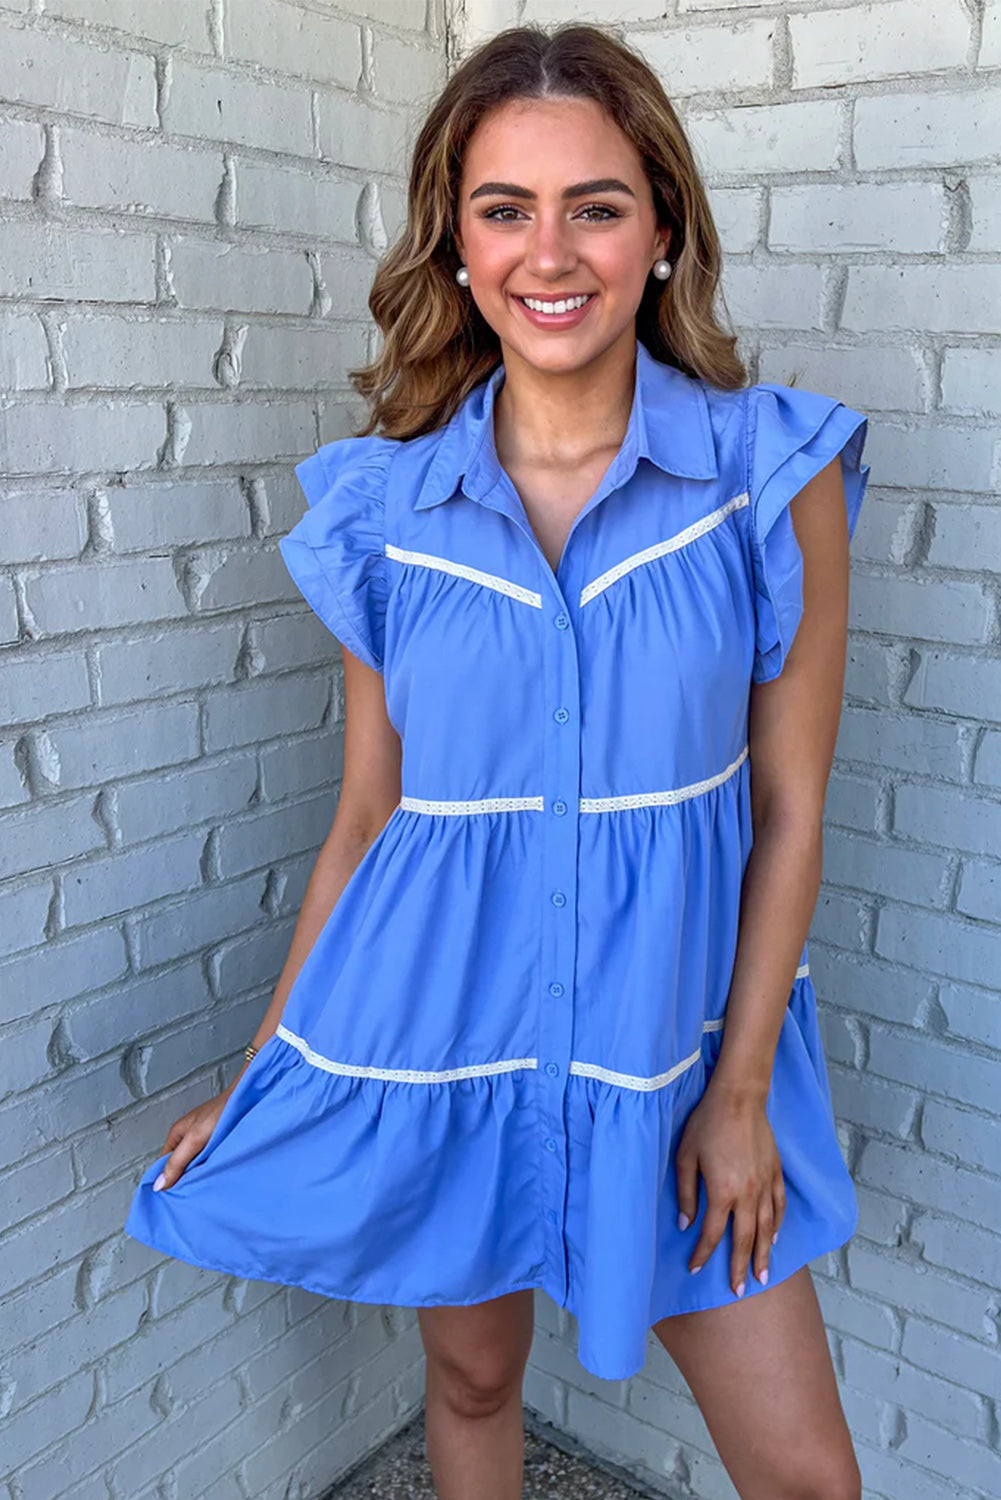 Sky Blue Collared Ruffle Tiered Babydoll Dress